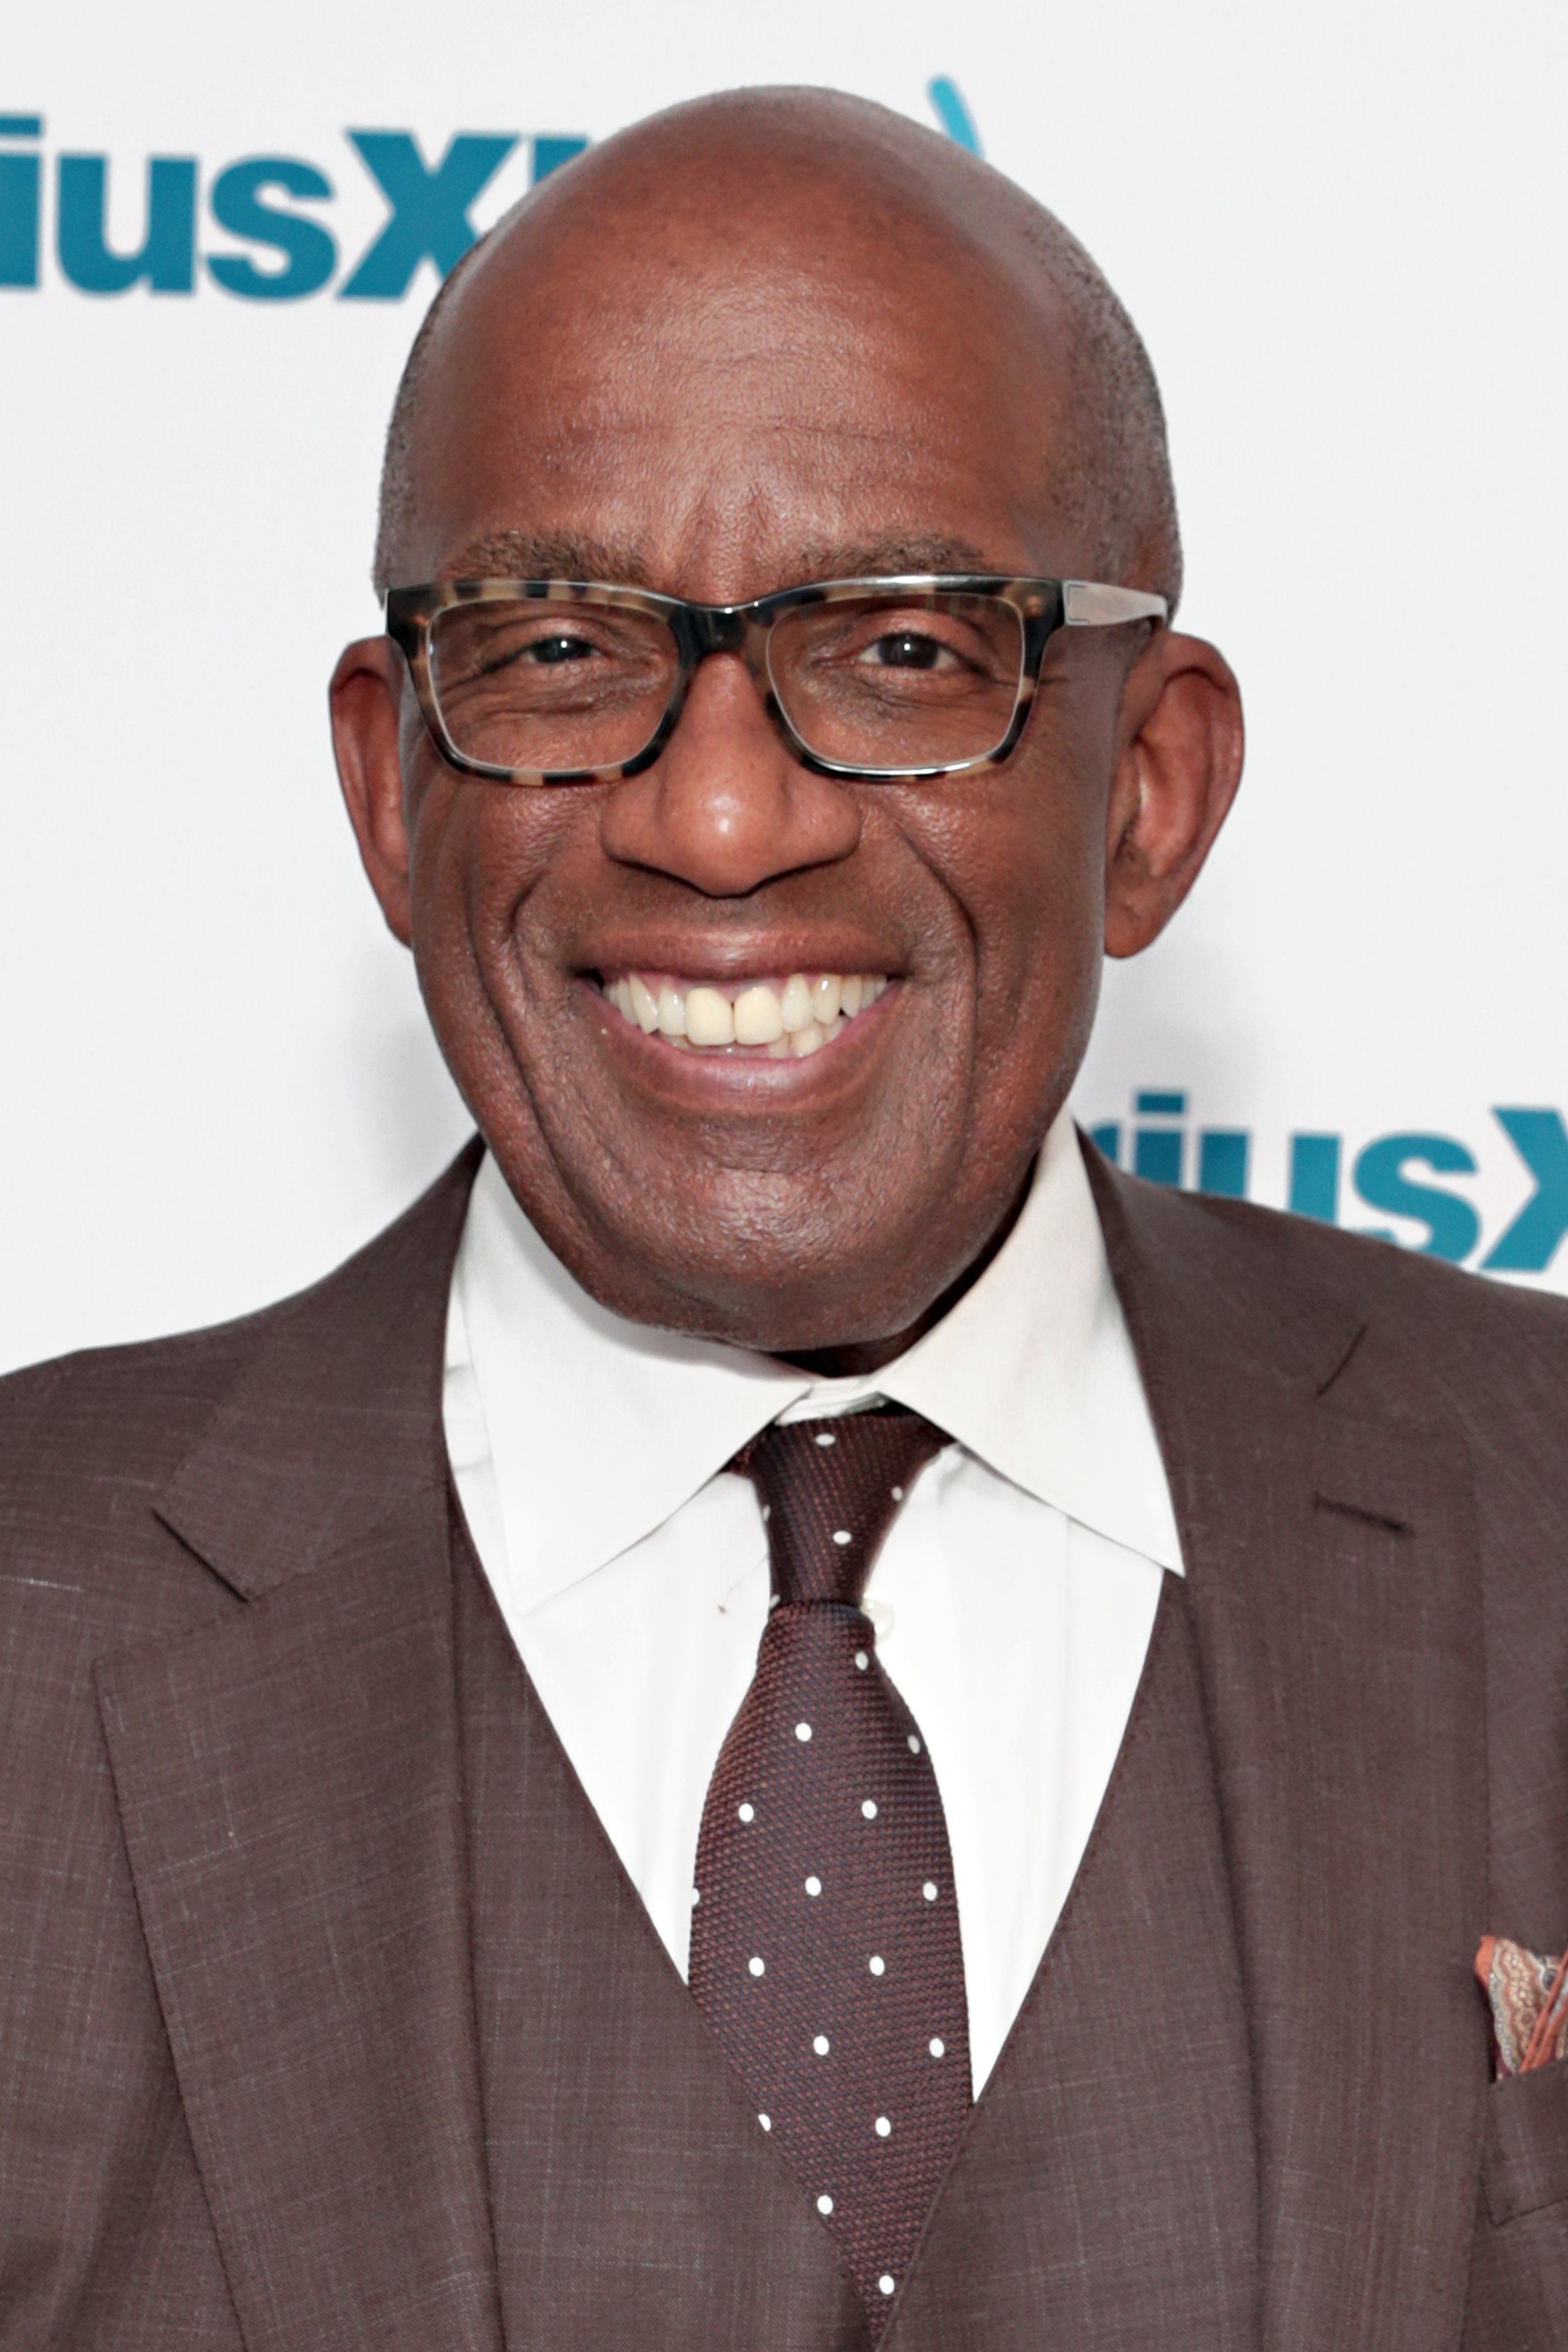 Al Roker visiting the SiriusXM Studios in May 2018. | Photo: Getty Images